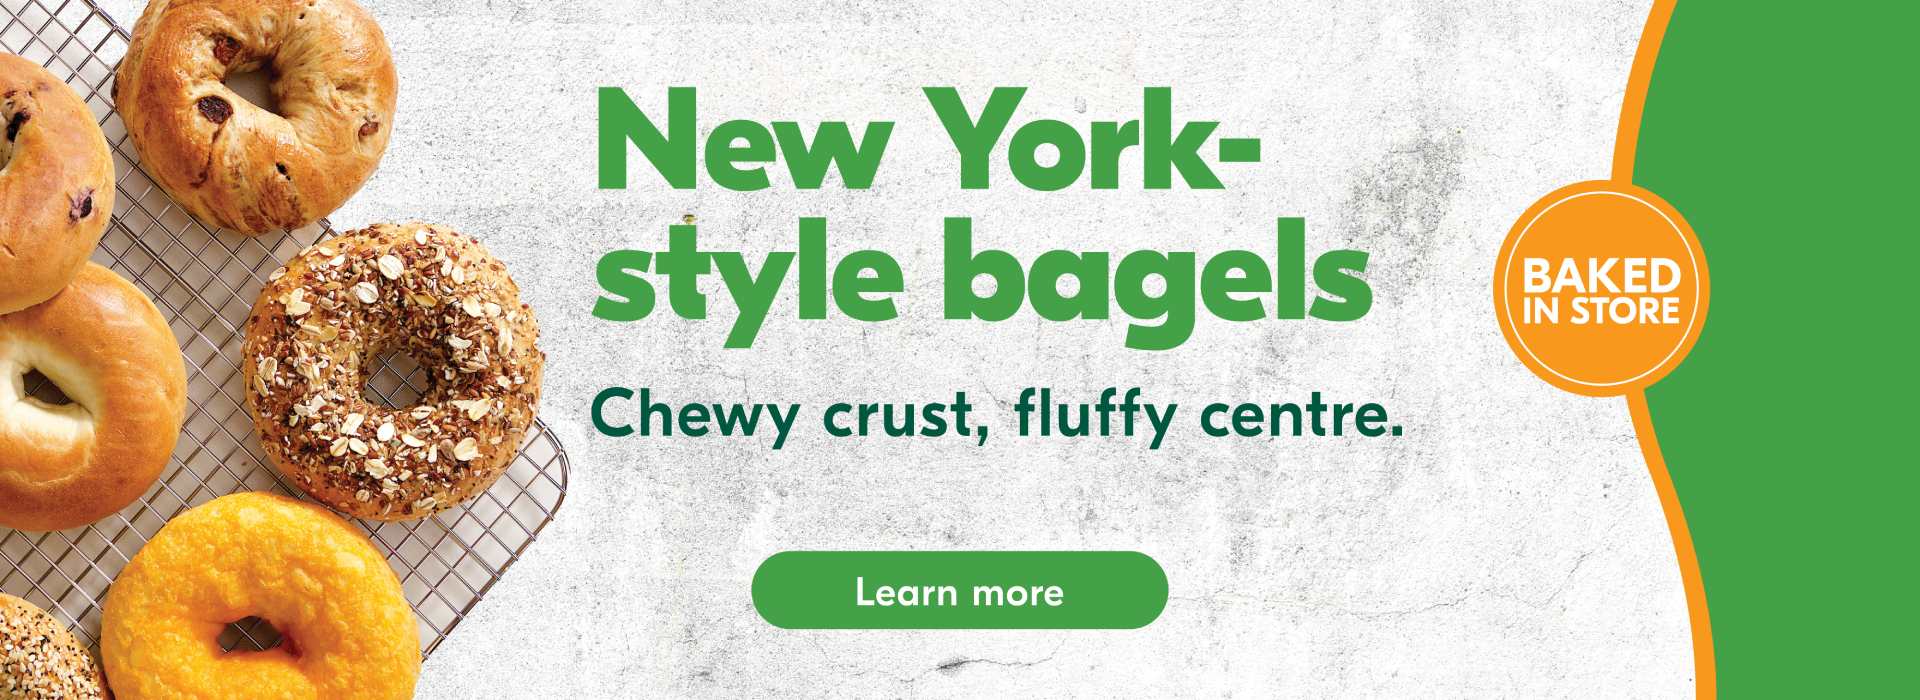 Text Reading 'New York style bagels. Baked in store. Chewy crust, fluffy centre. 'Learn more' from the button given below.'